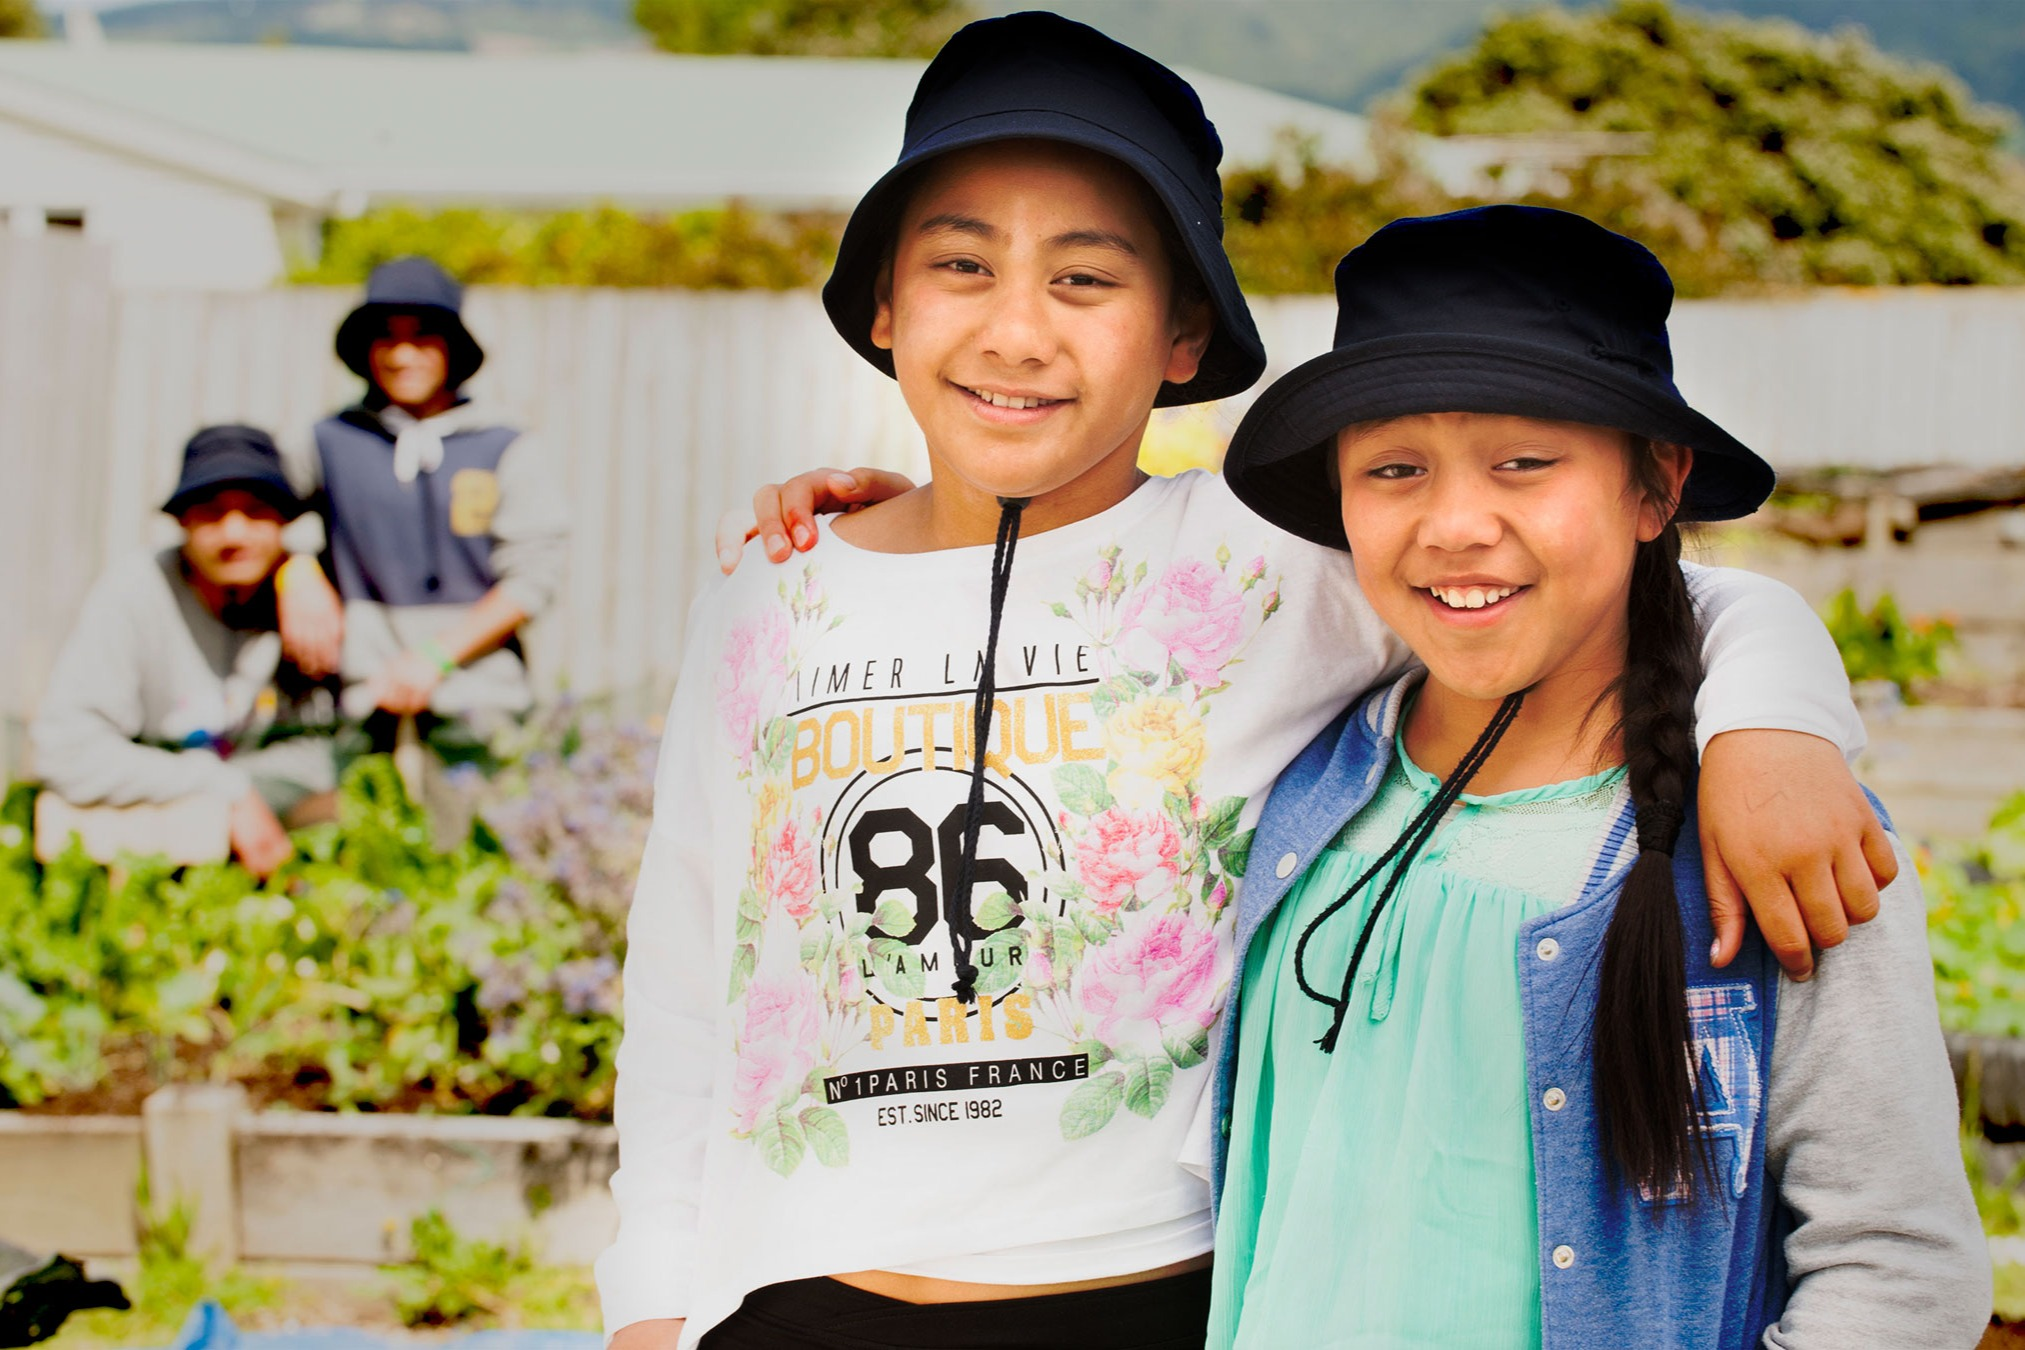 Two children standing in a garden with hats on